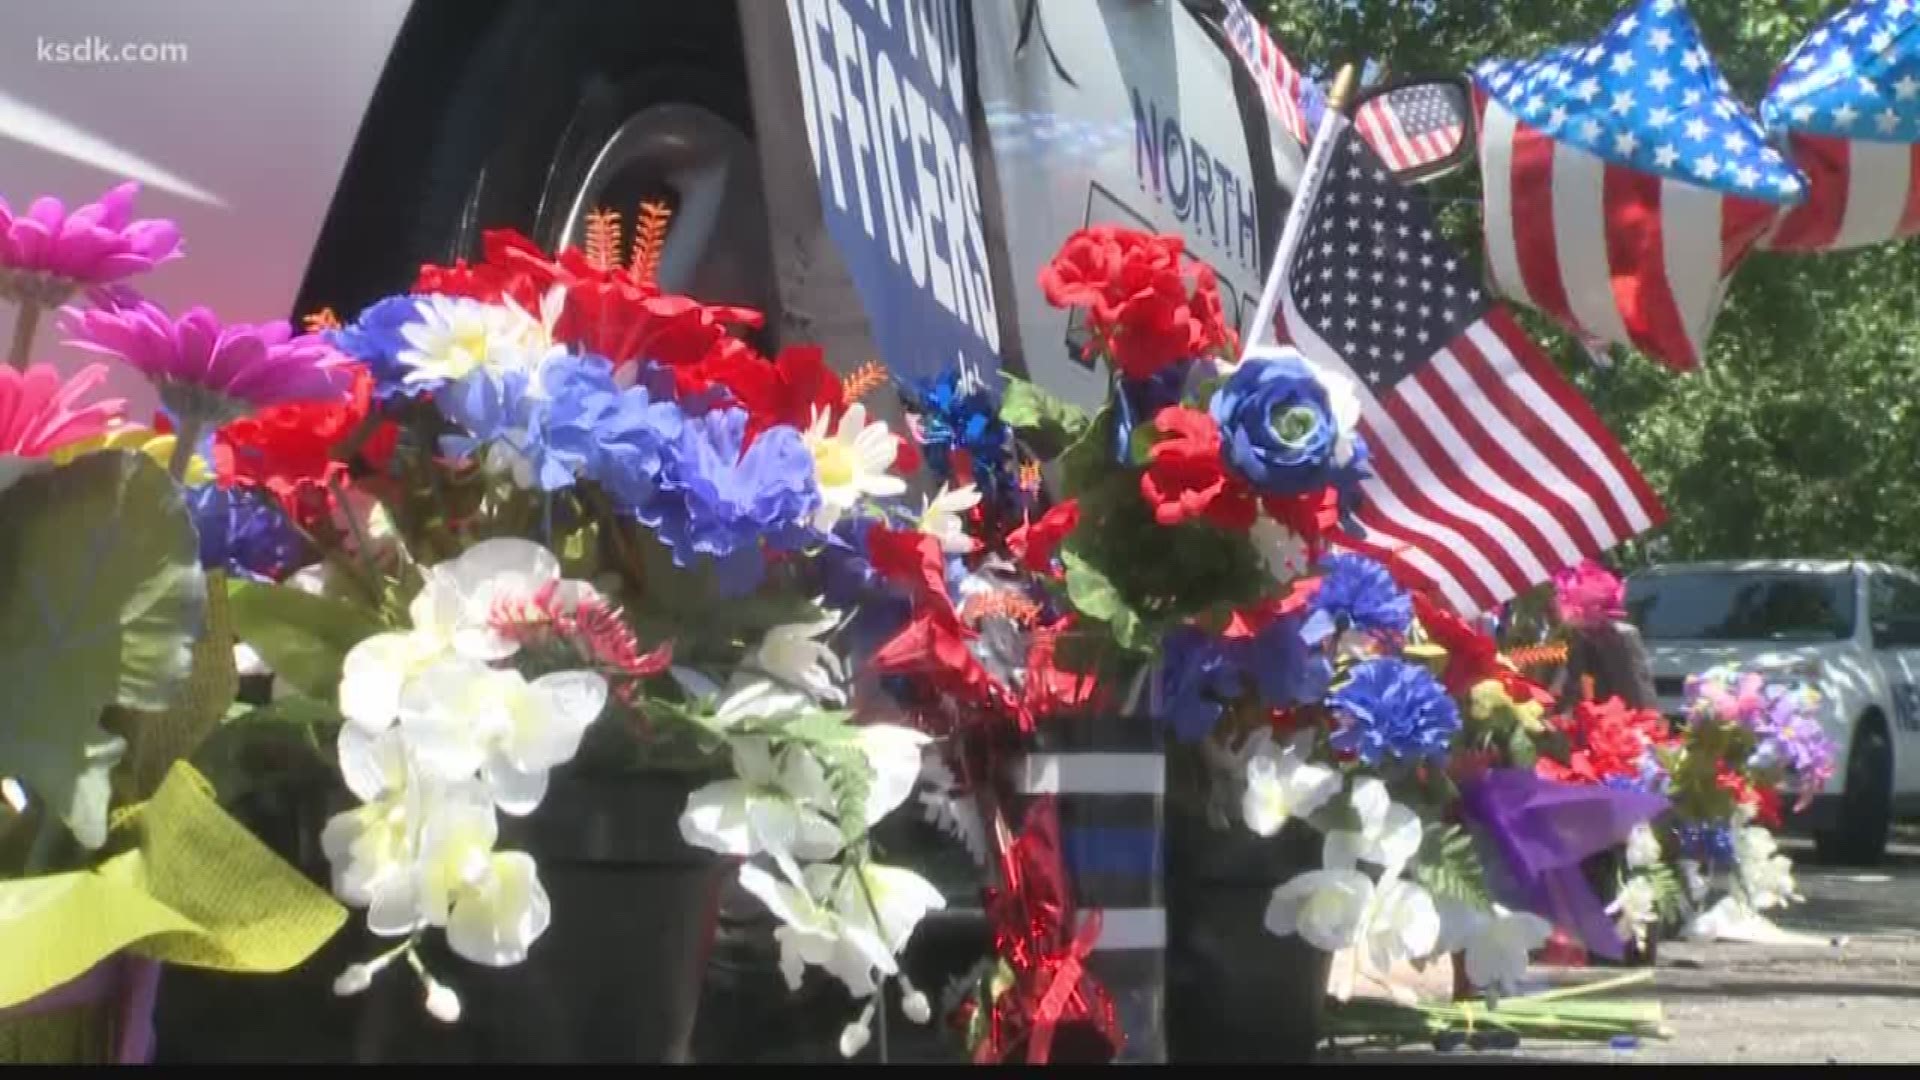 The memorial for Officer Michale Langsdorf has been growing by the minute.